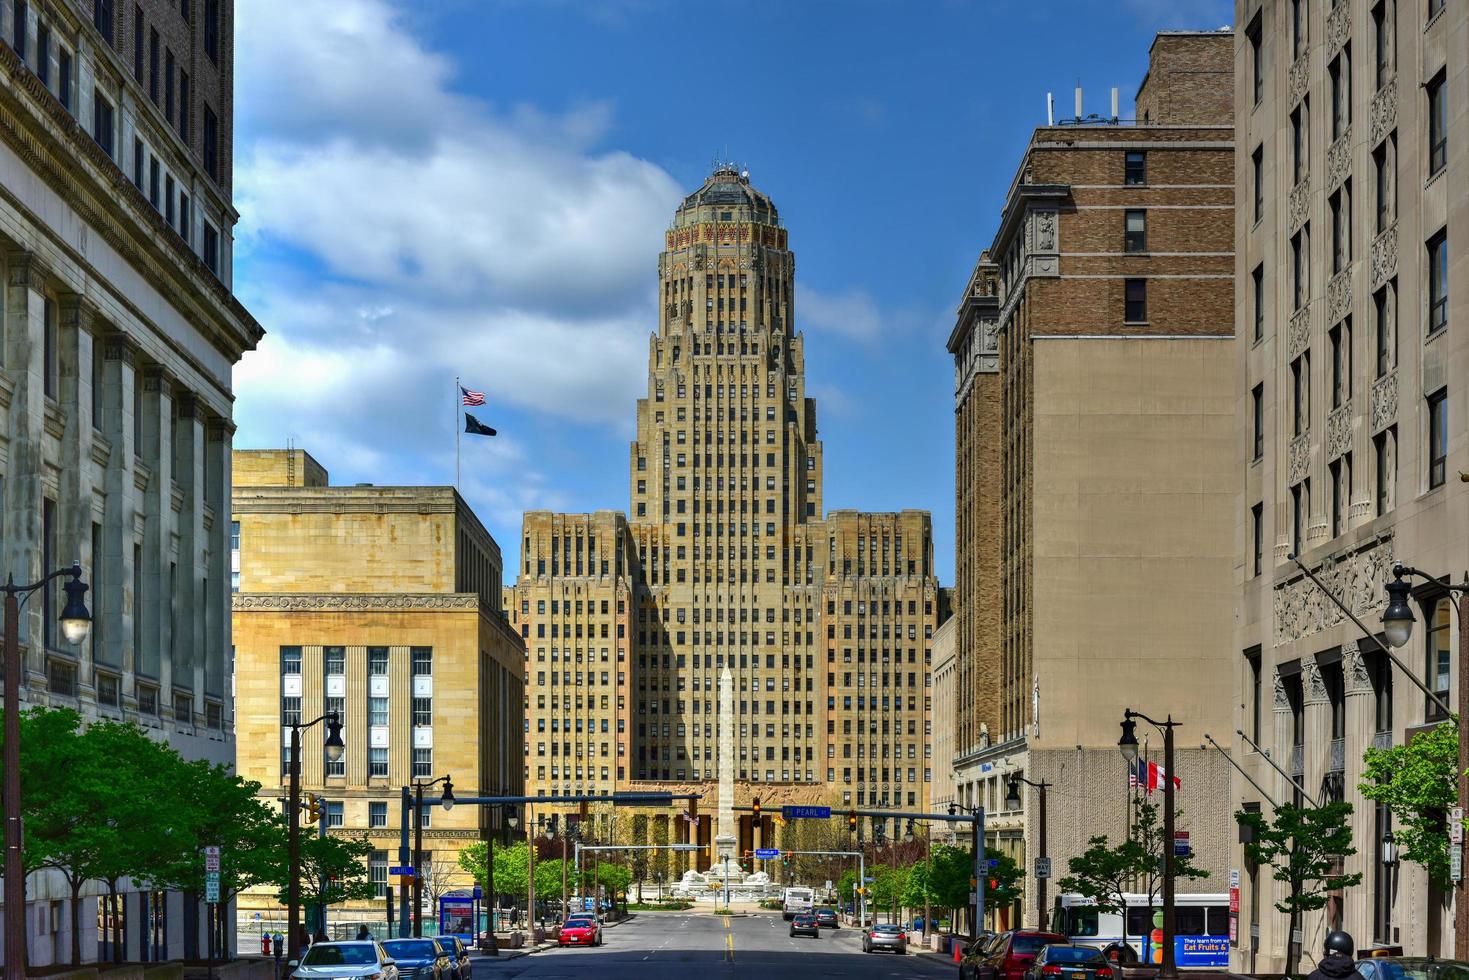 Buffalo City Hall, the seat for municipal government in the City of Buffalo, 2022 photo